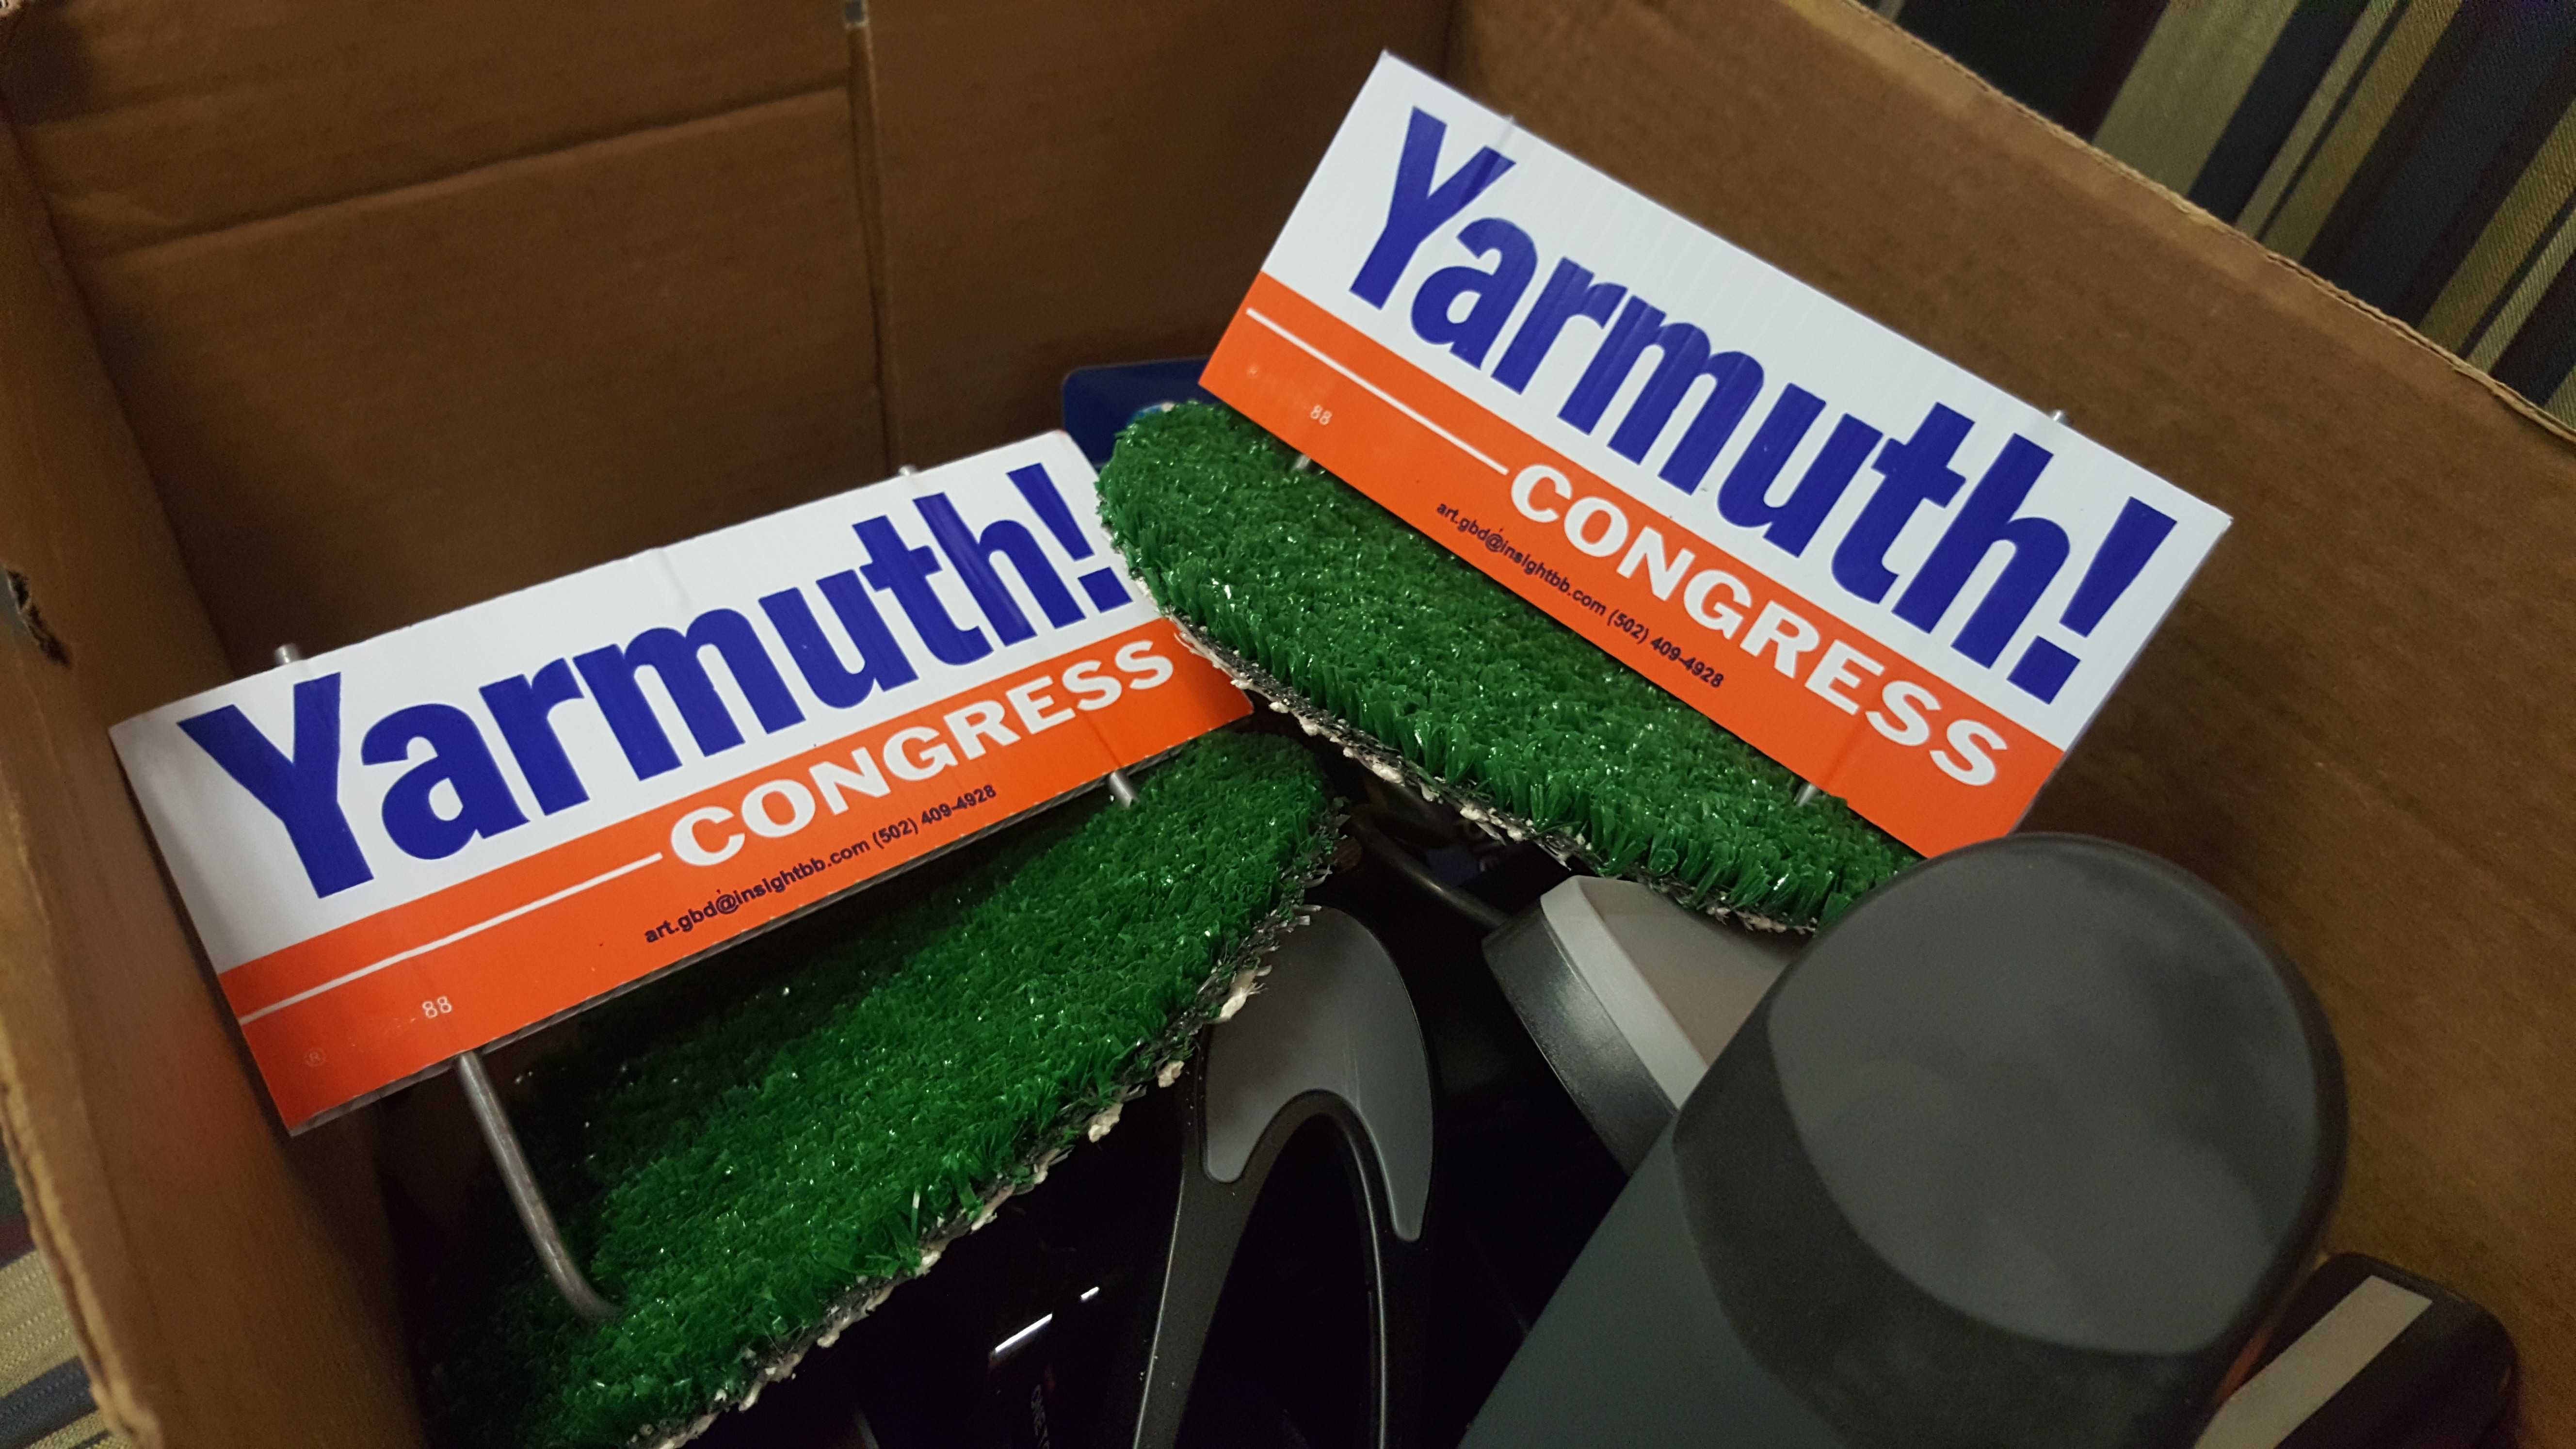 Yarmuth sign models are kept in box before Yarmuth speaks. Photo by Phoebe Monsour.